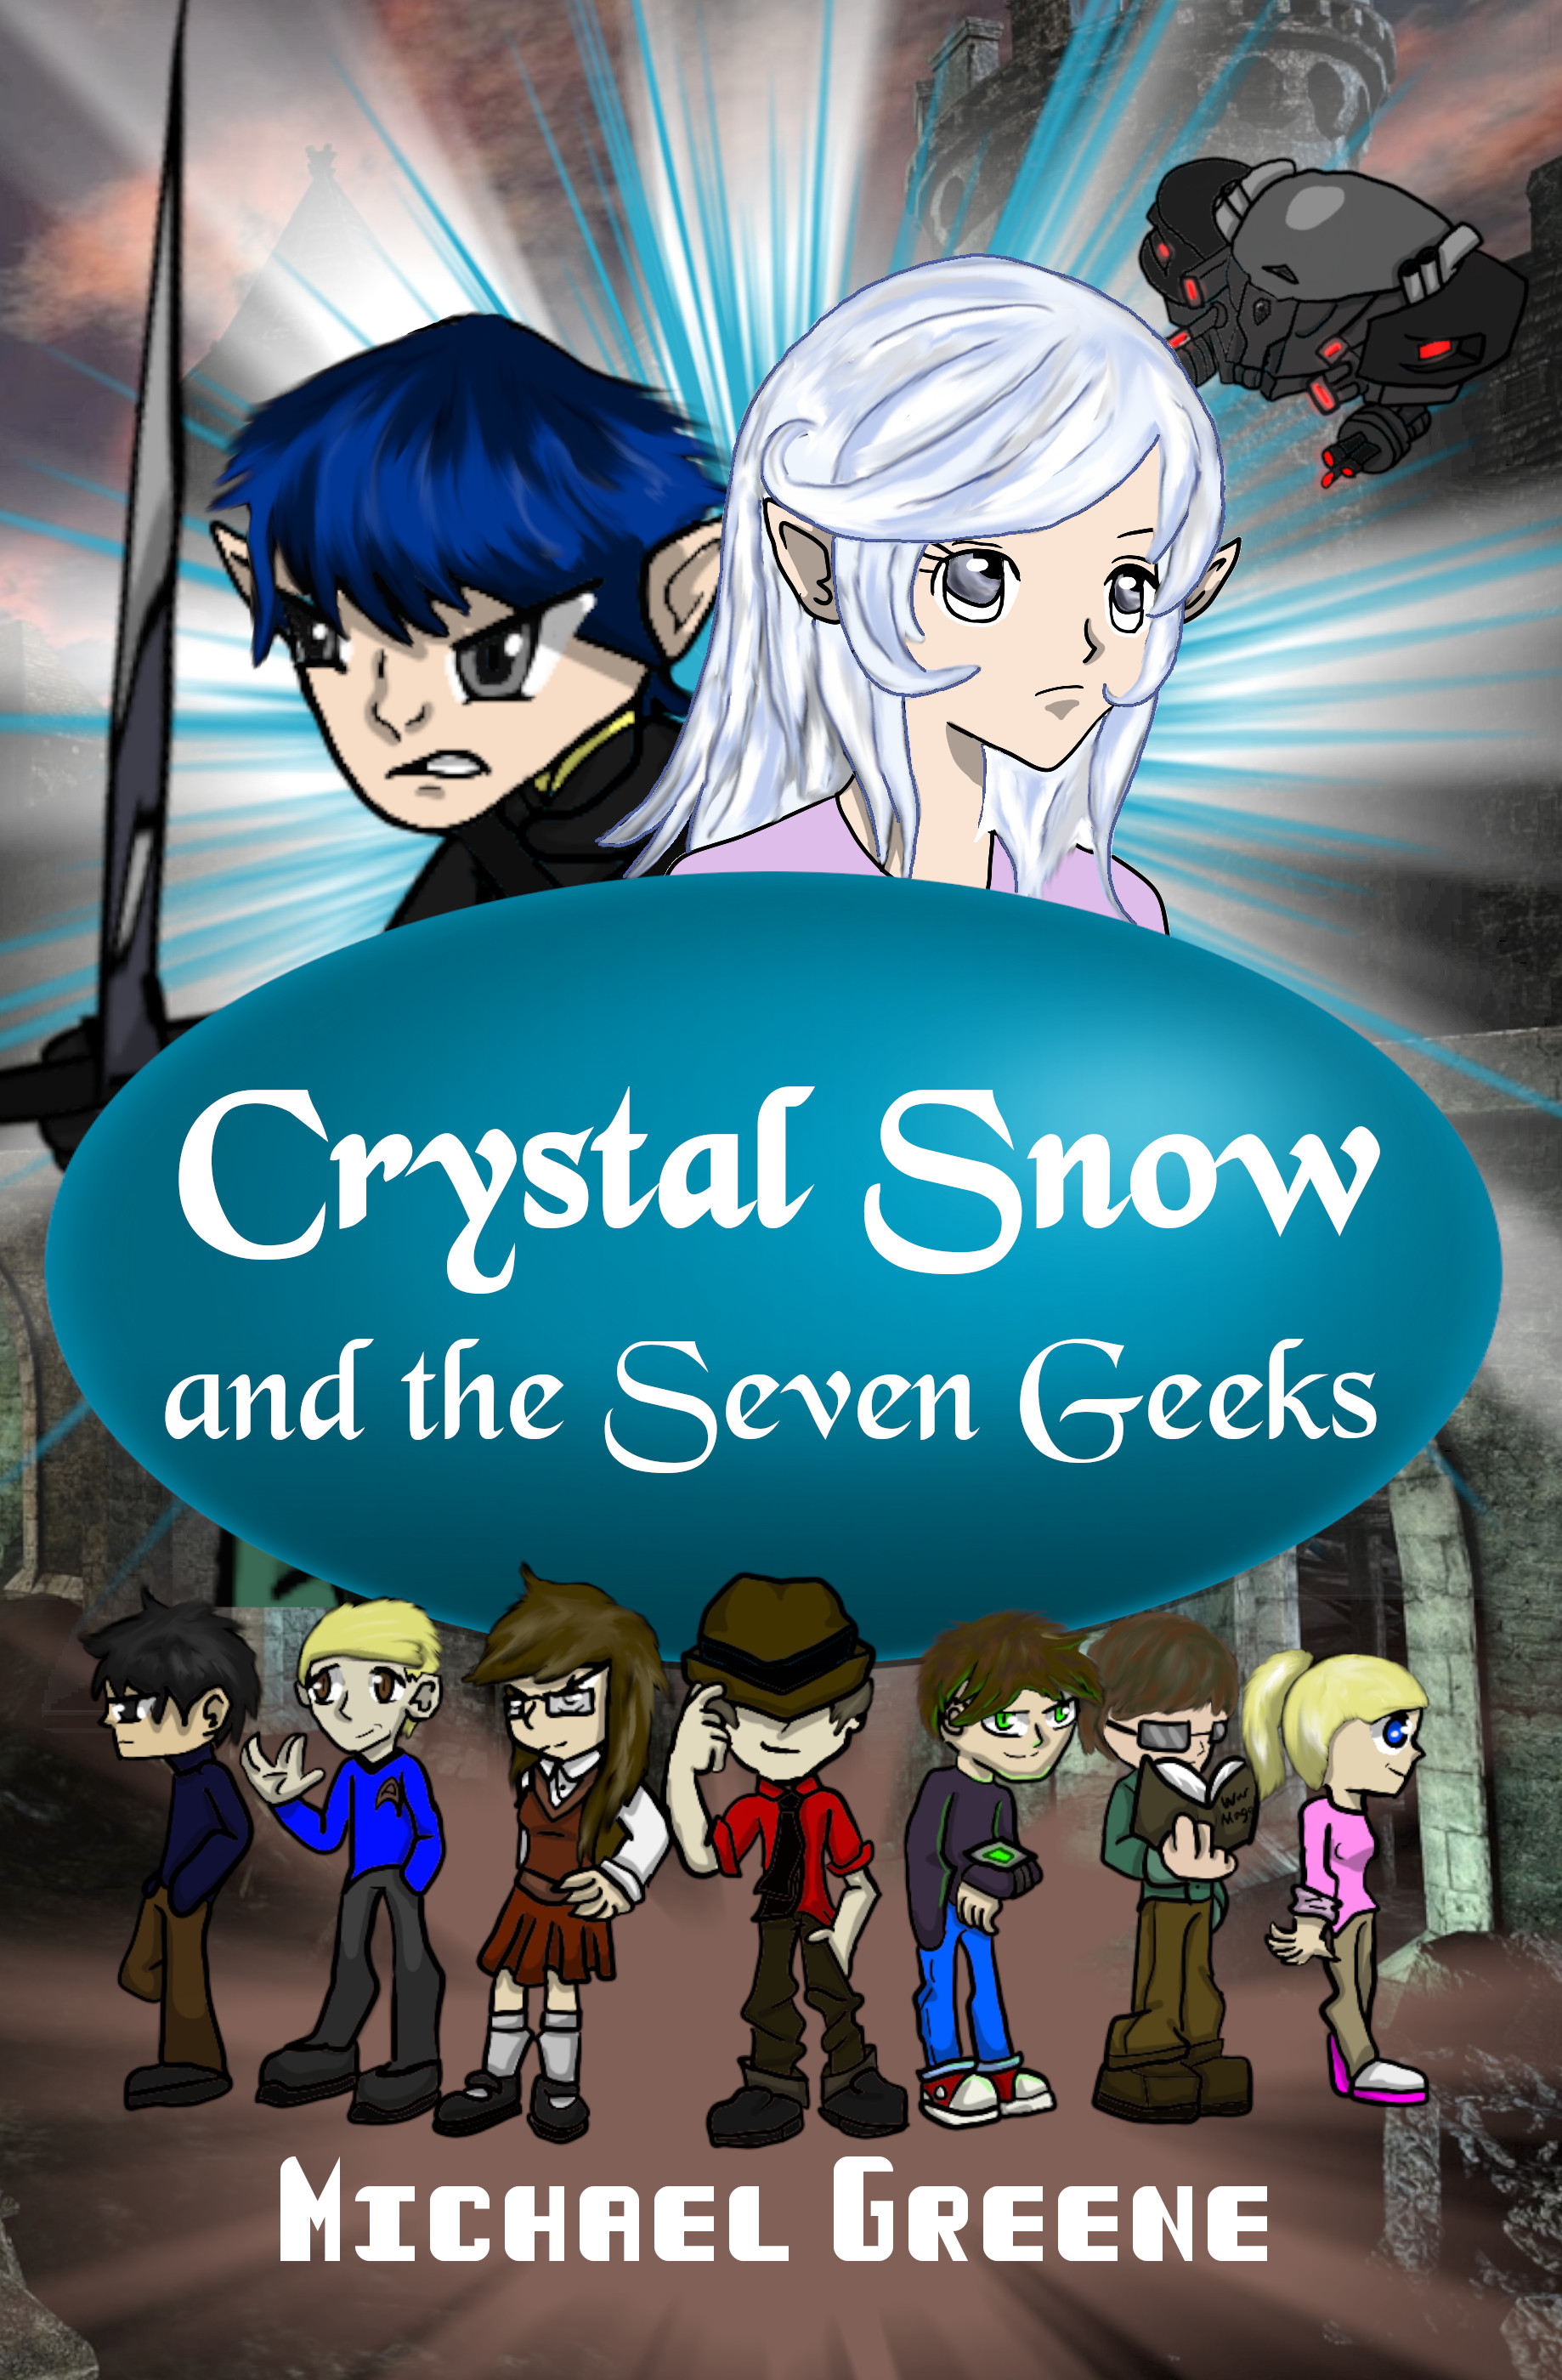 Retro Tales: Crystal Snow and the Seven Geeks